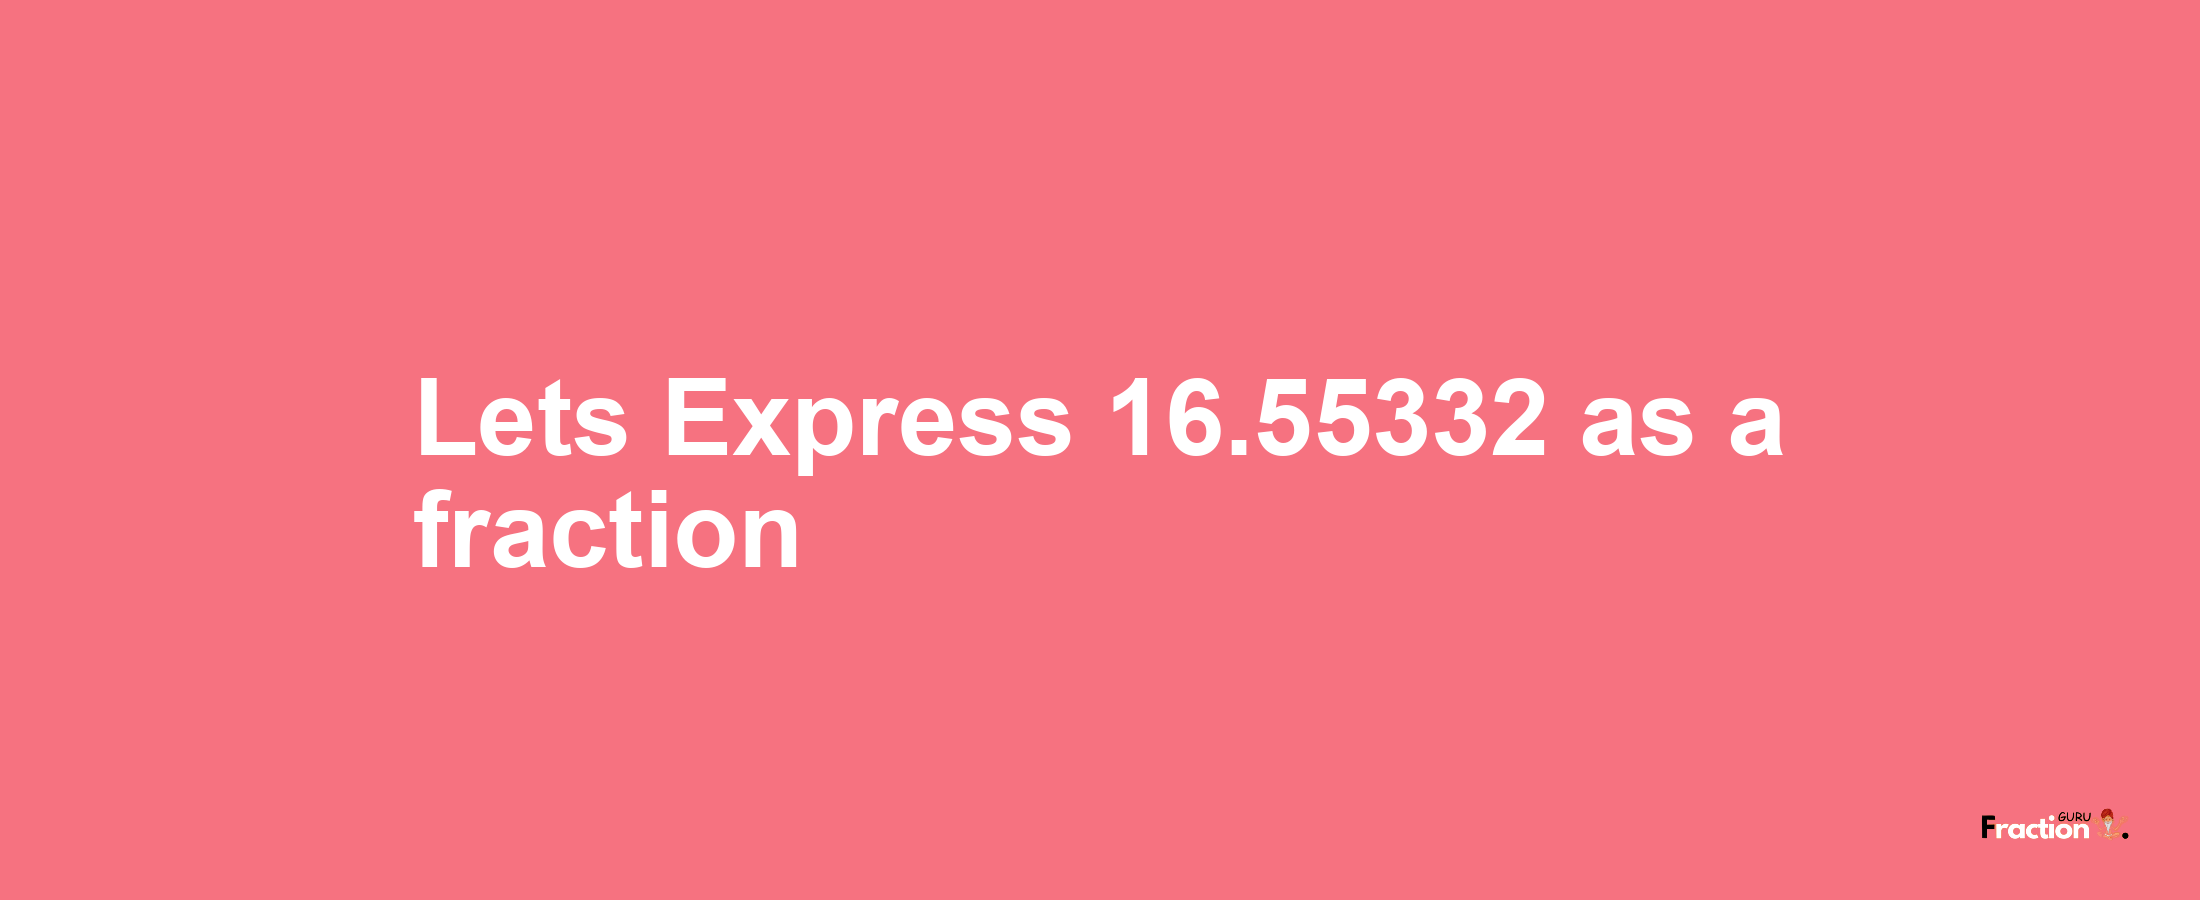 Lets Express 16.55332 as afraction